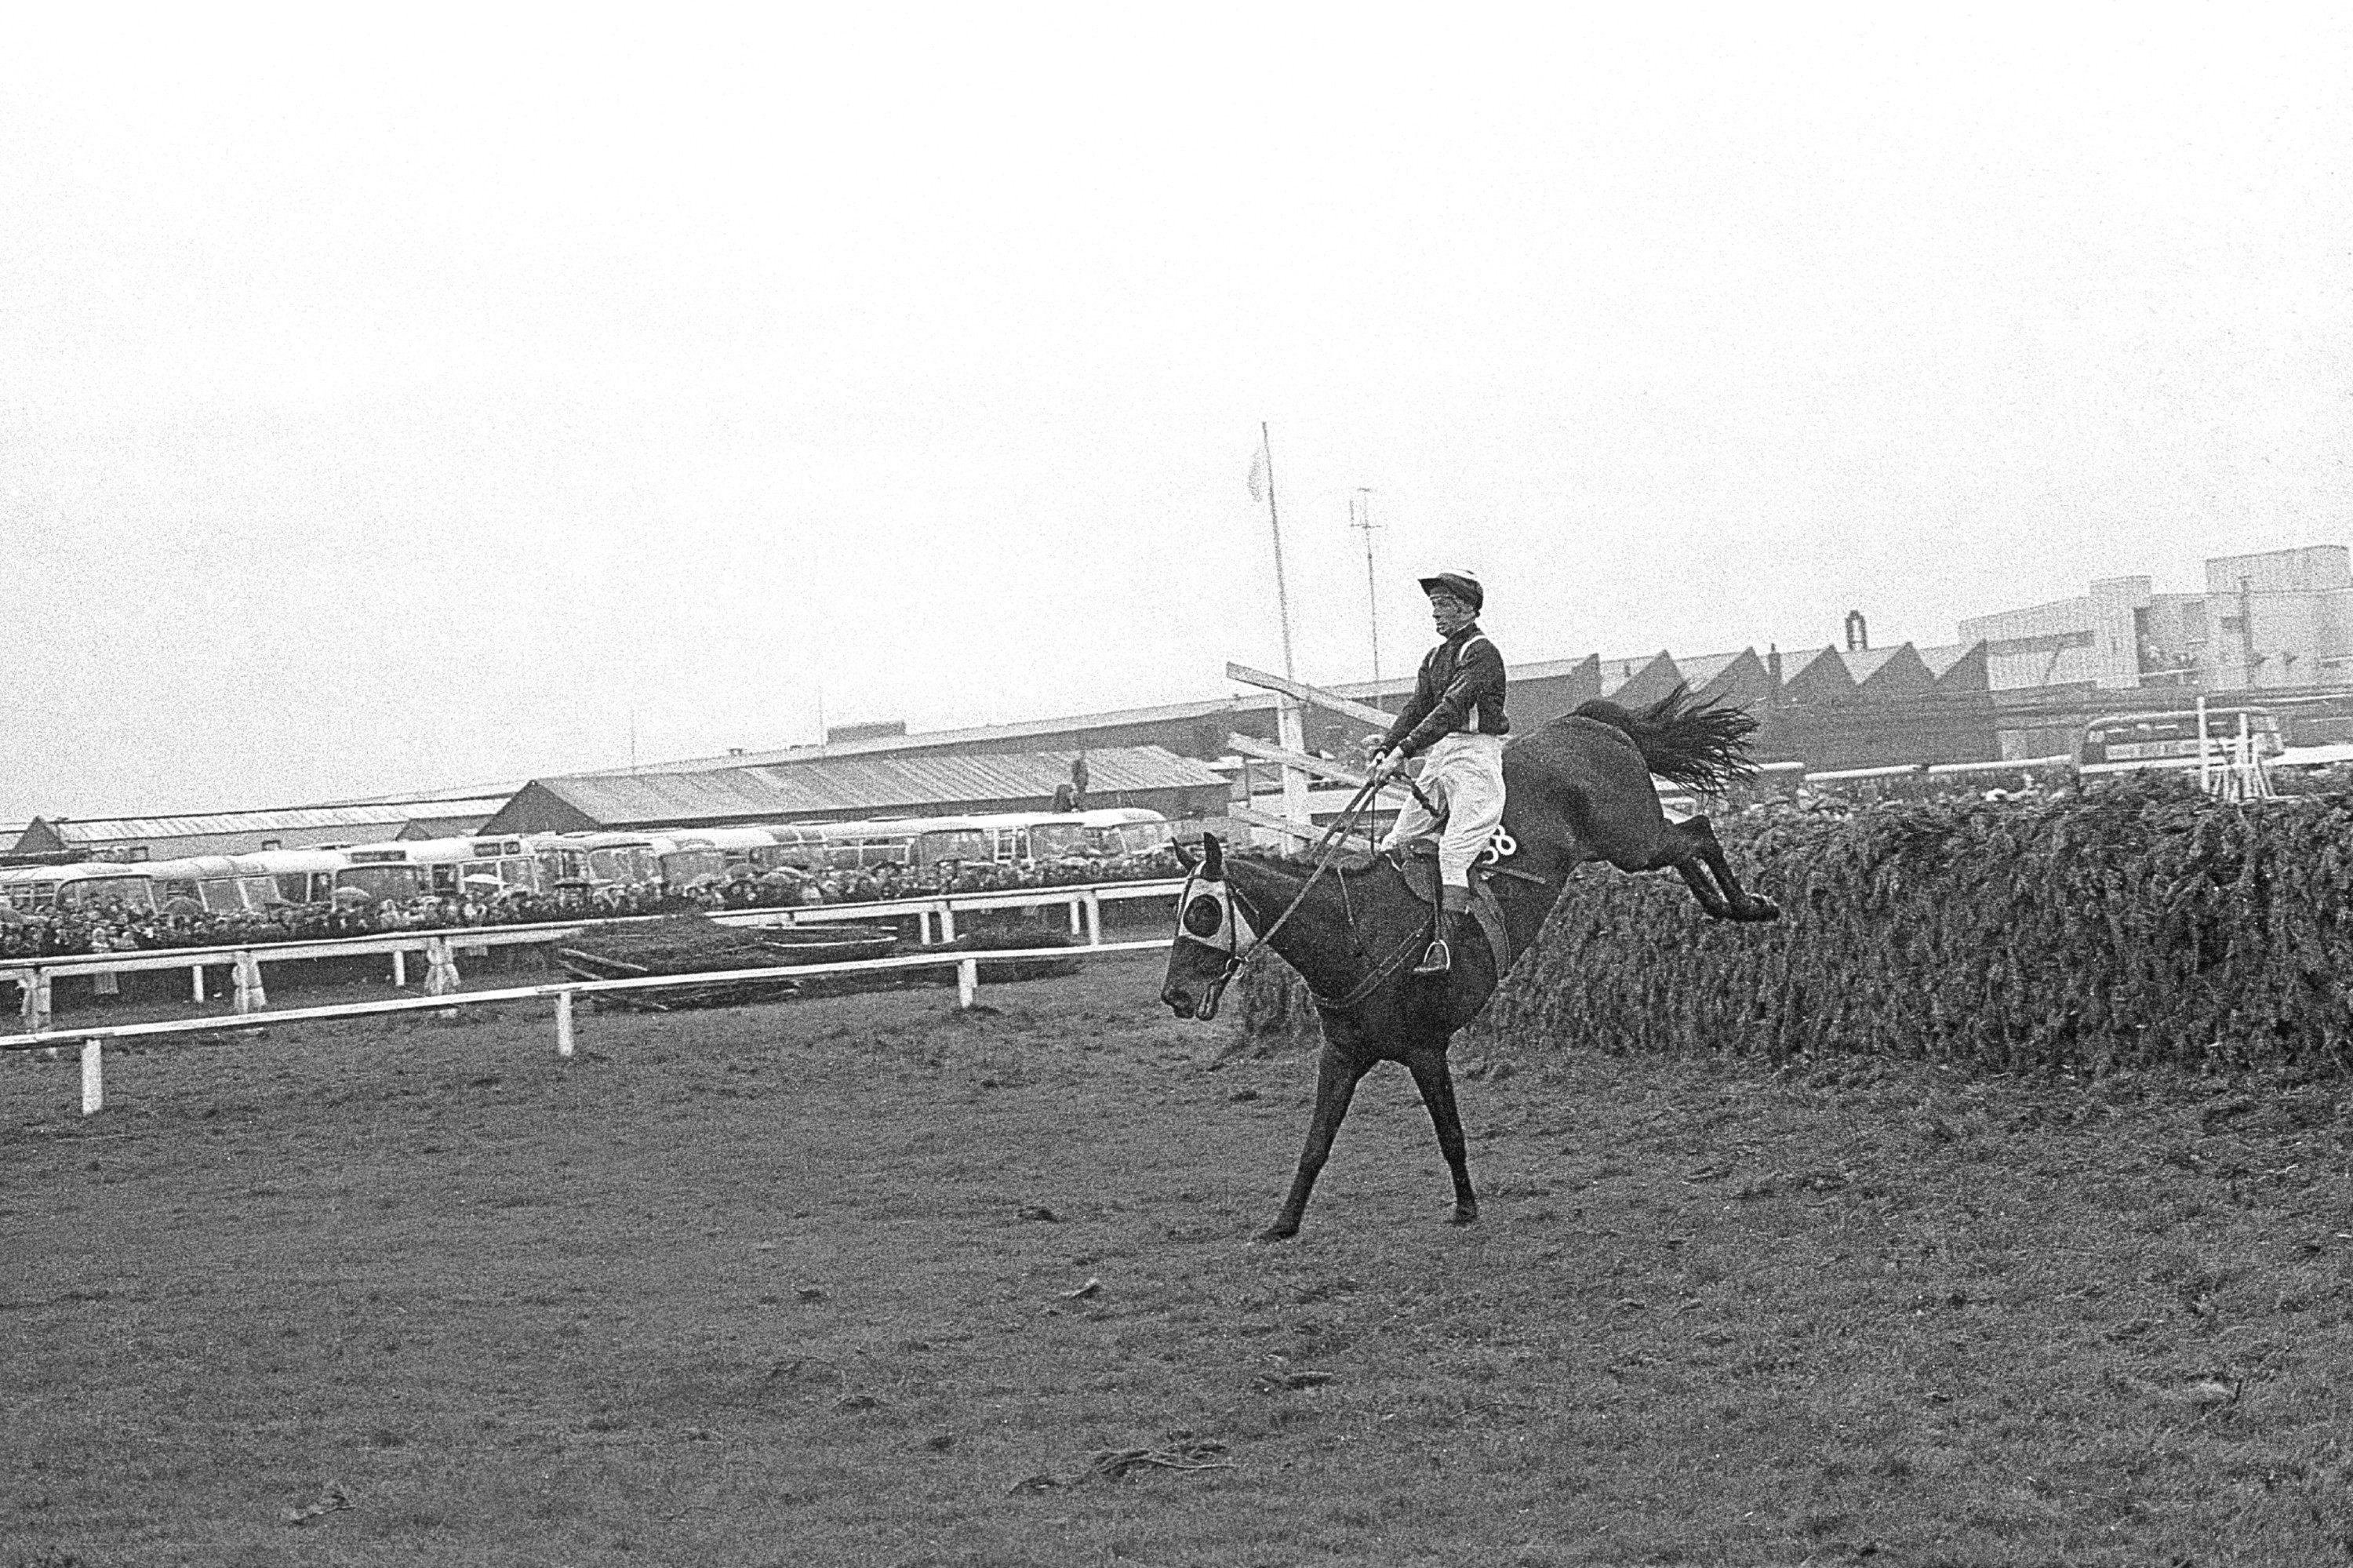 Foinavon, ridden by John Buckingham, lands confidently after sailing over the last fence in the Grand National, 1967 (PA Archive/PA Images)